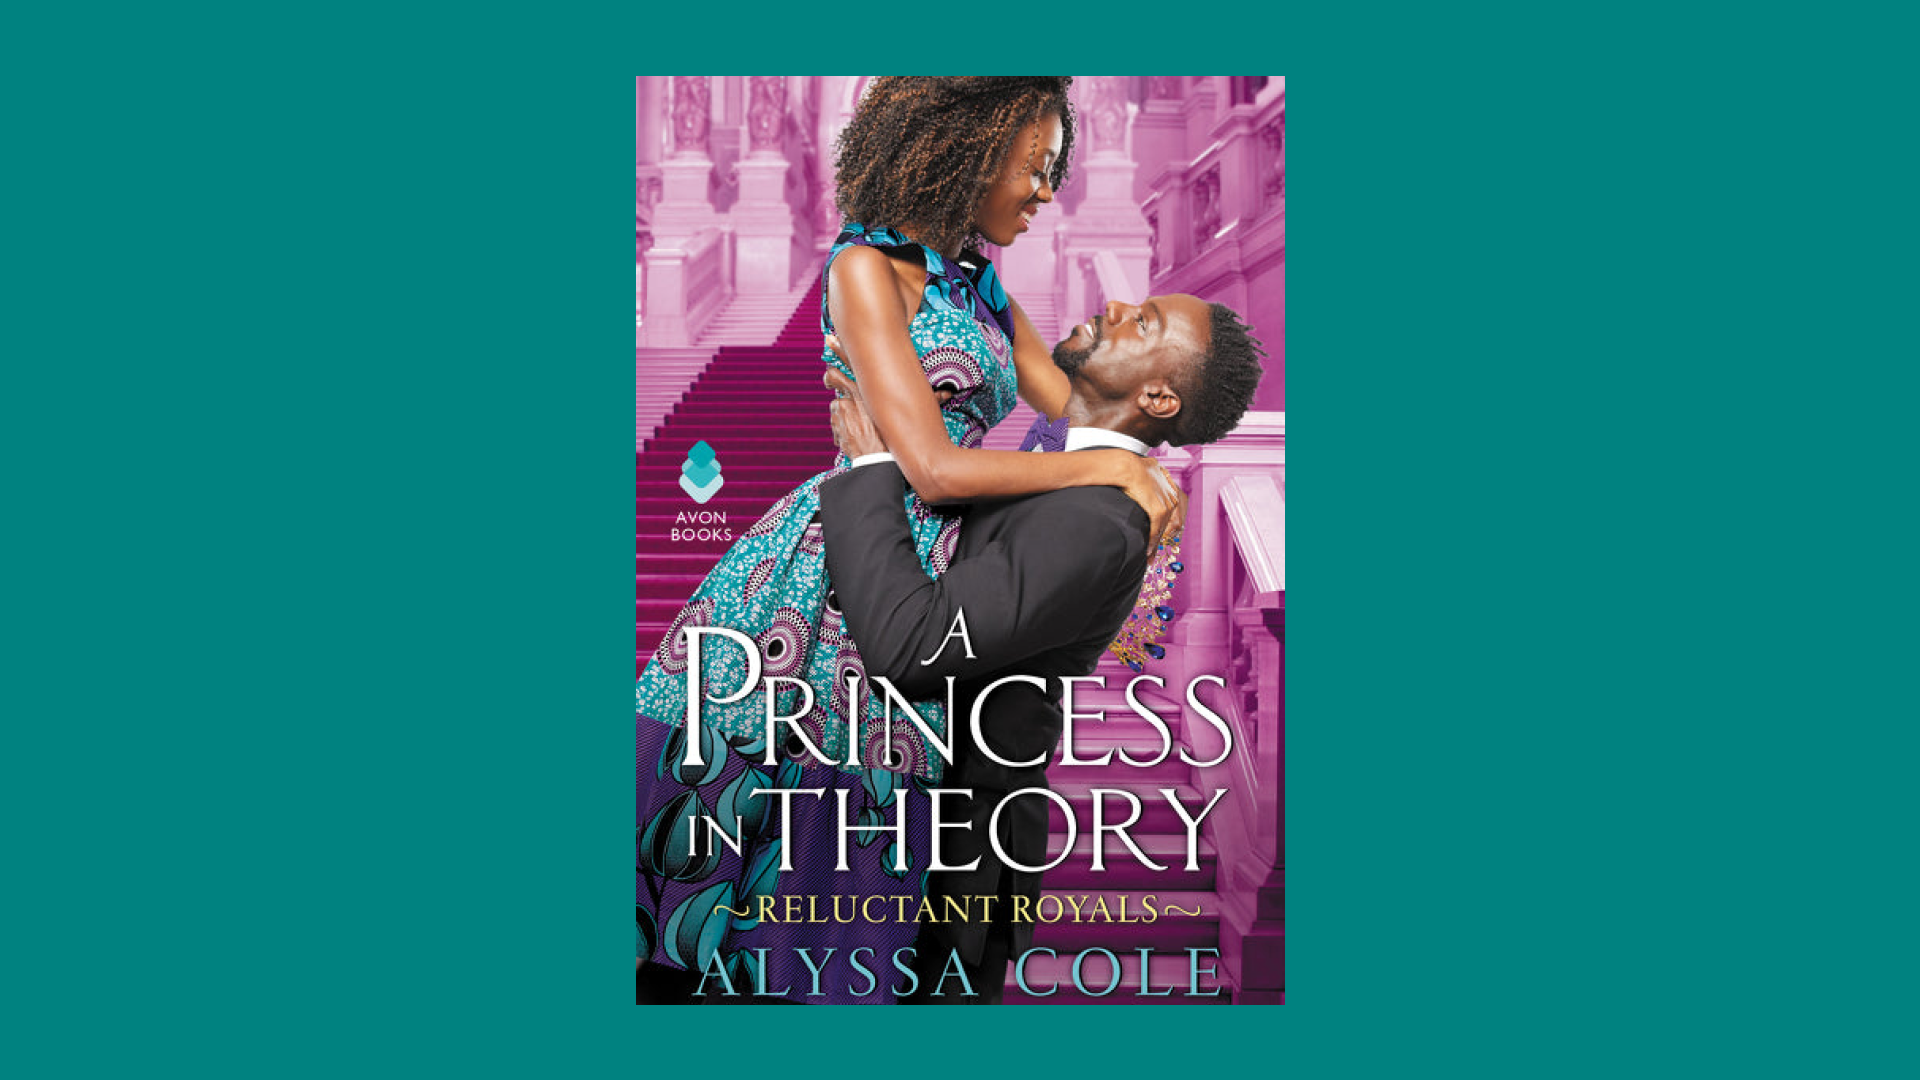 “A Princess in Theory” by Alyssa Cole